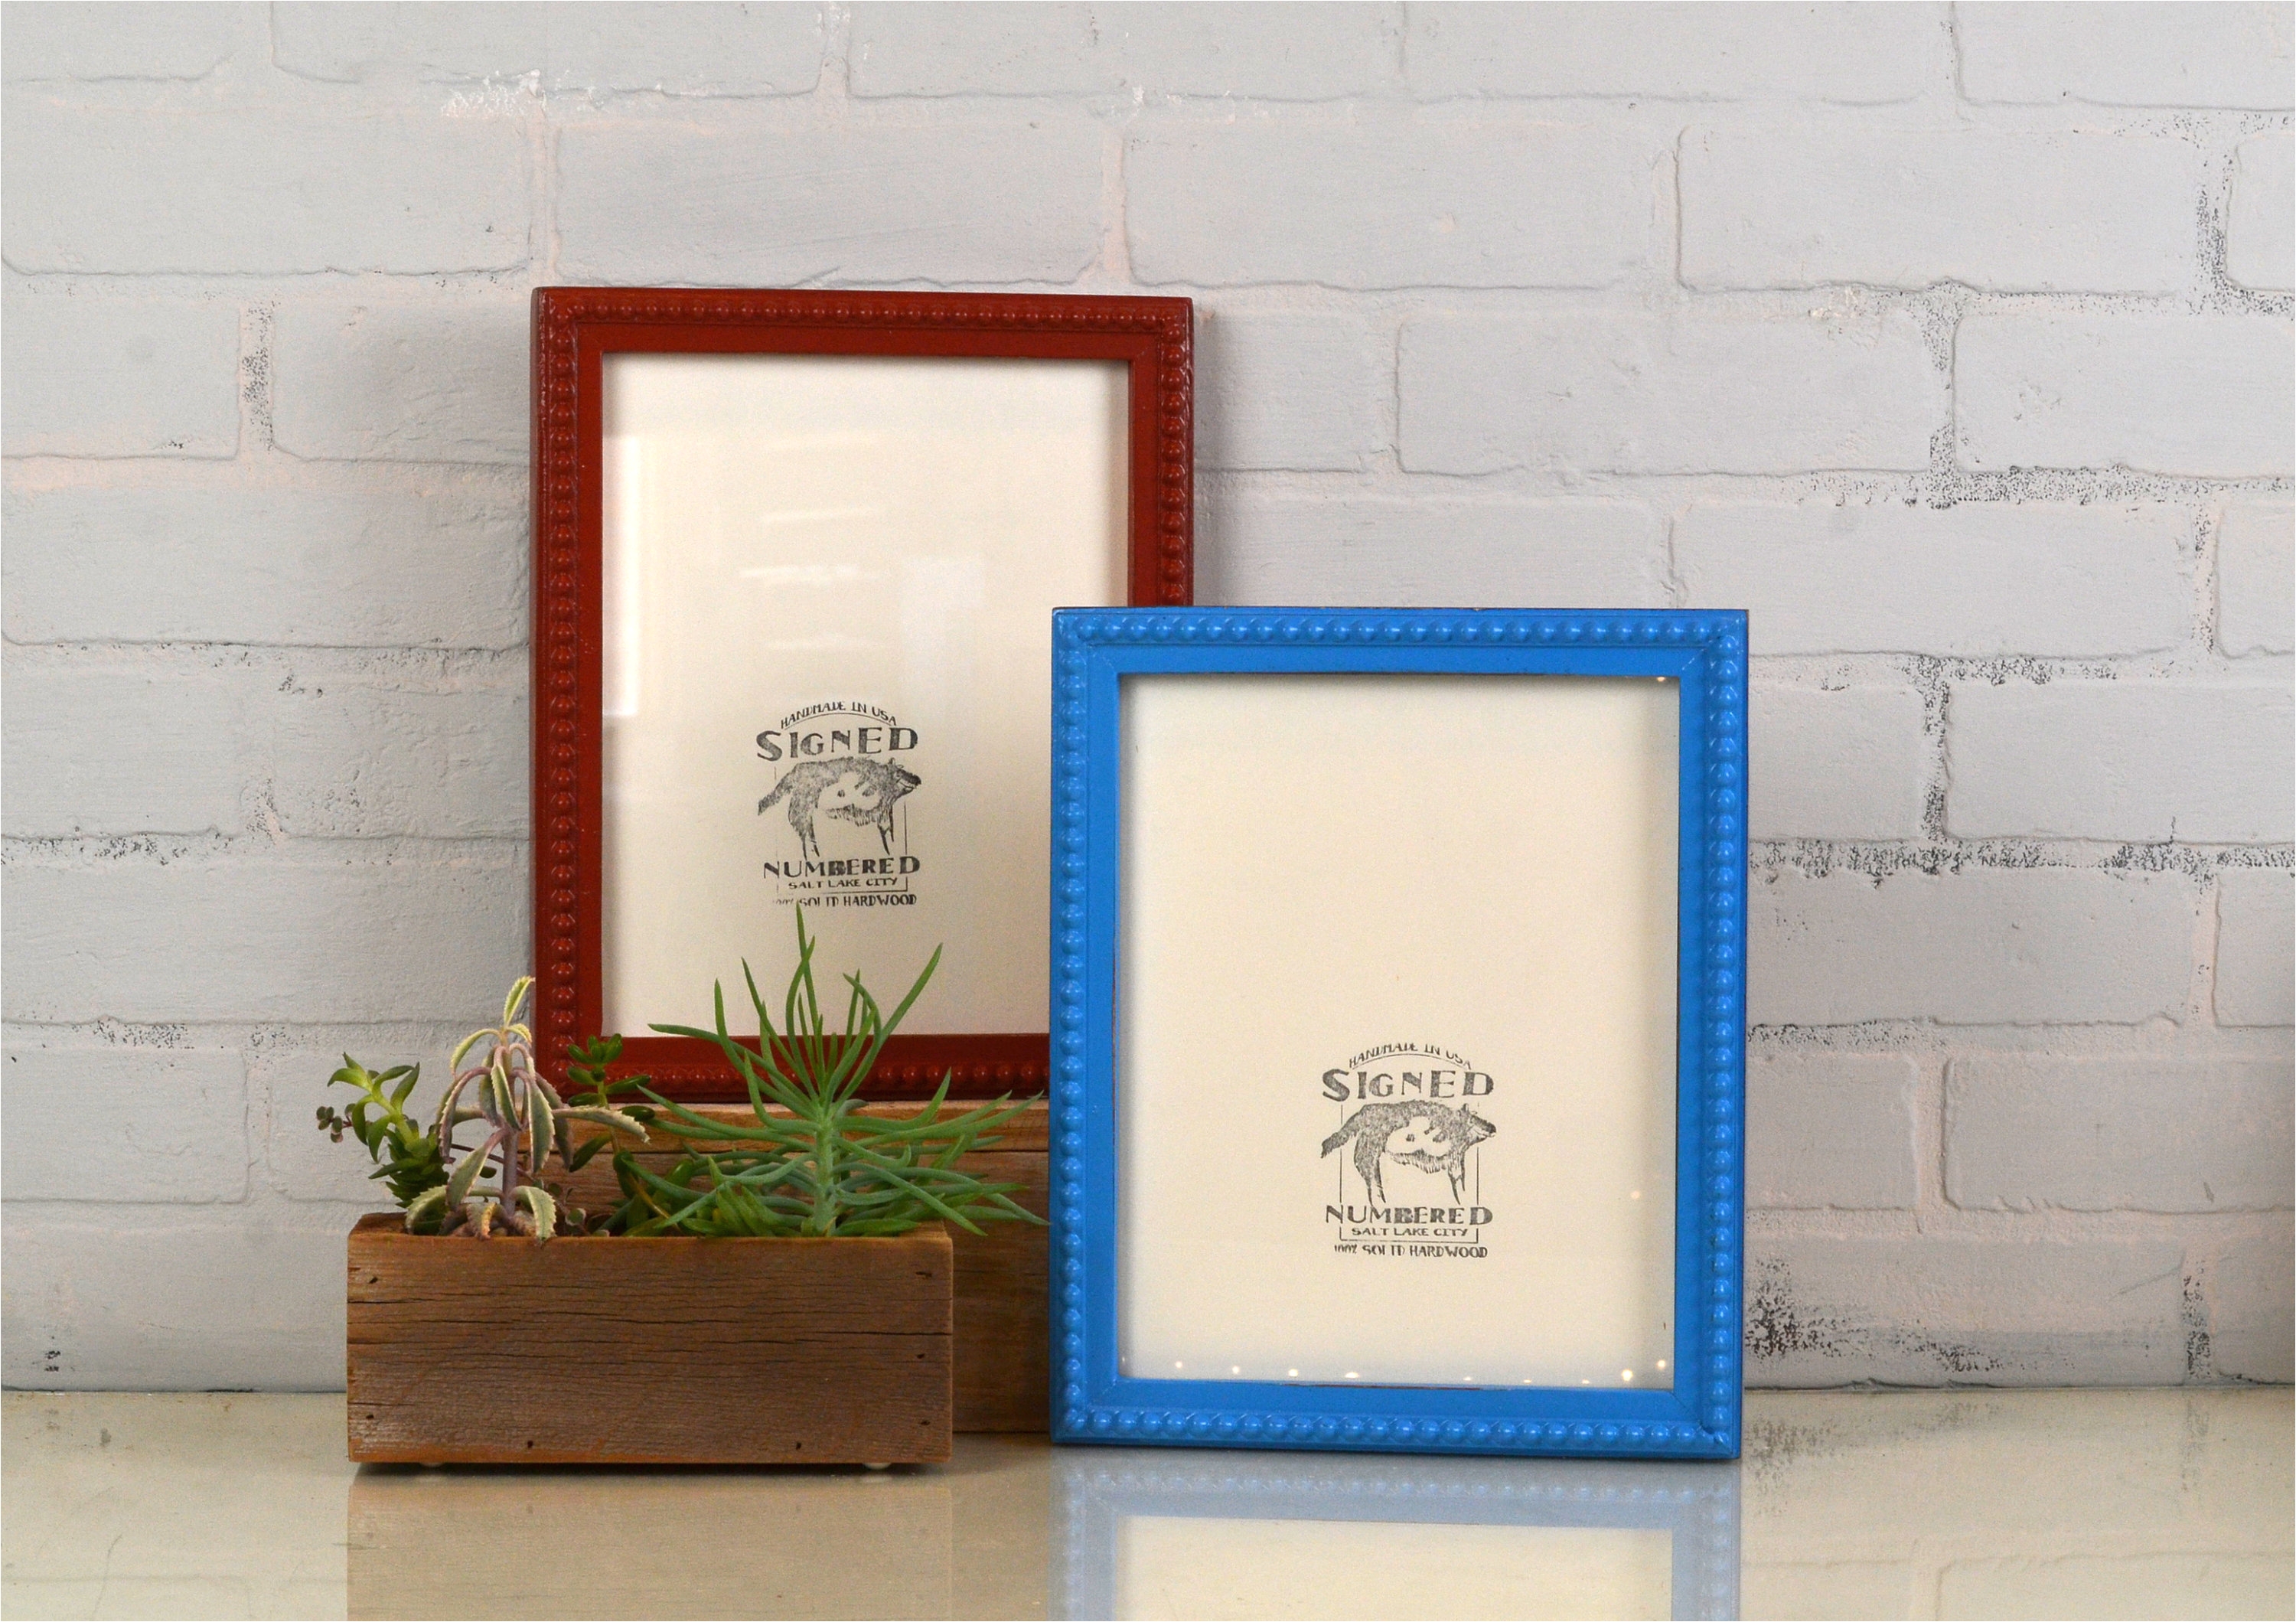 8x10 picture frame in 1x1 decorative bumpy style in vintage finish color of your choice can be any color 8 x 10 inch rustic white frame